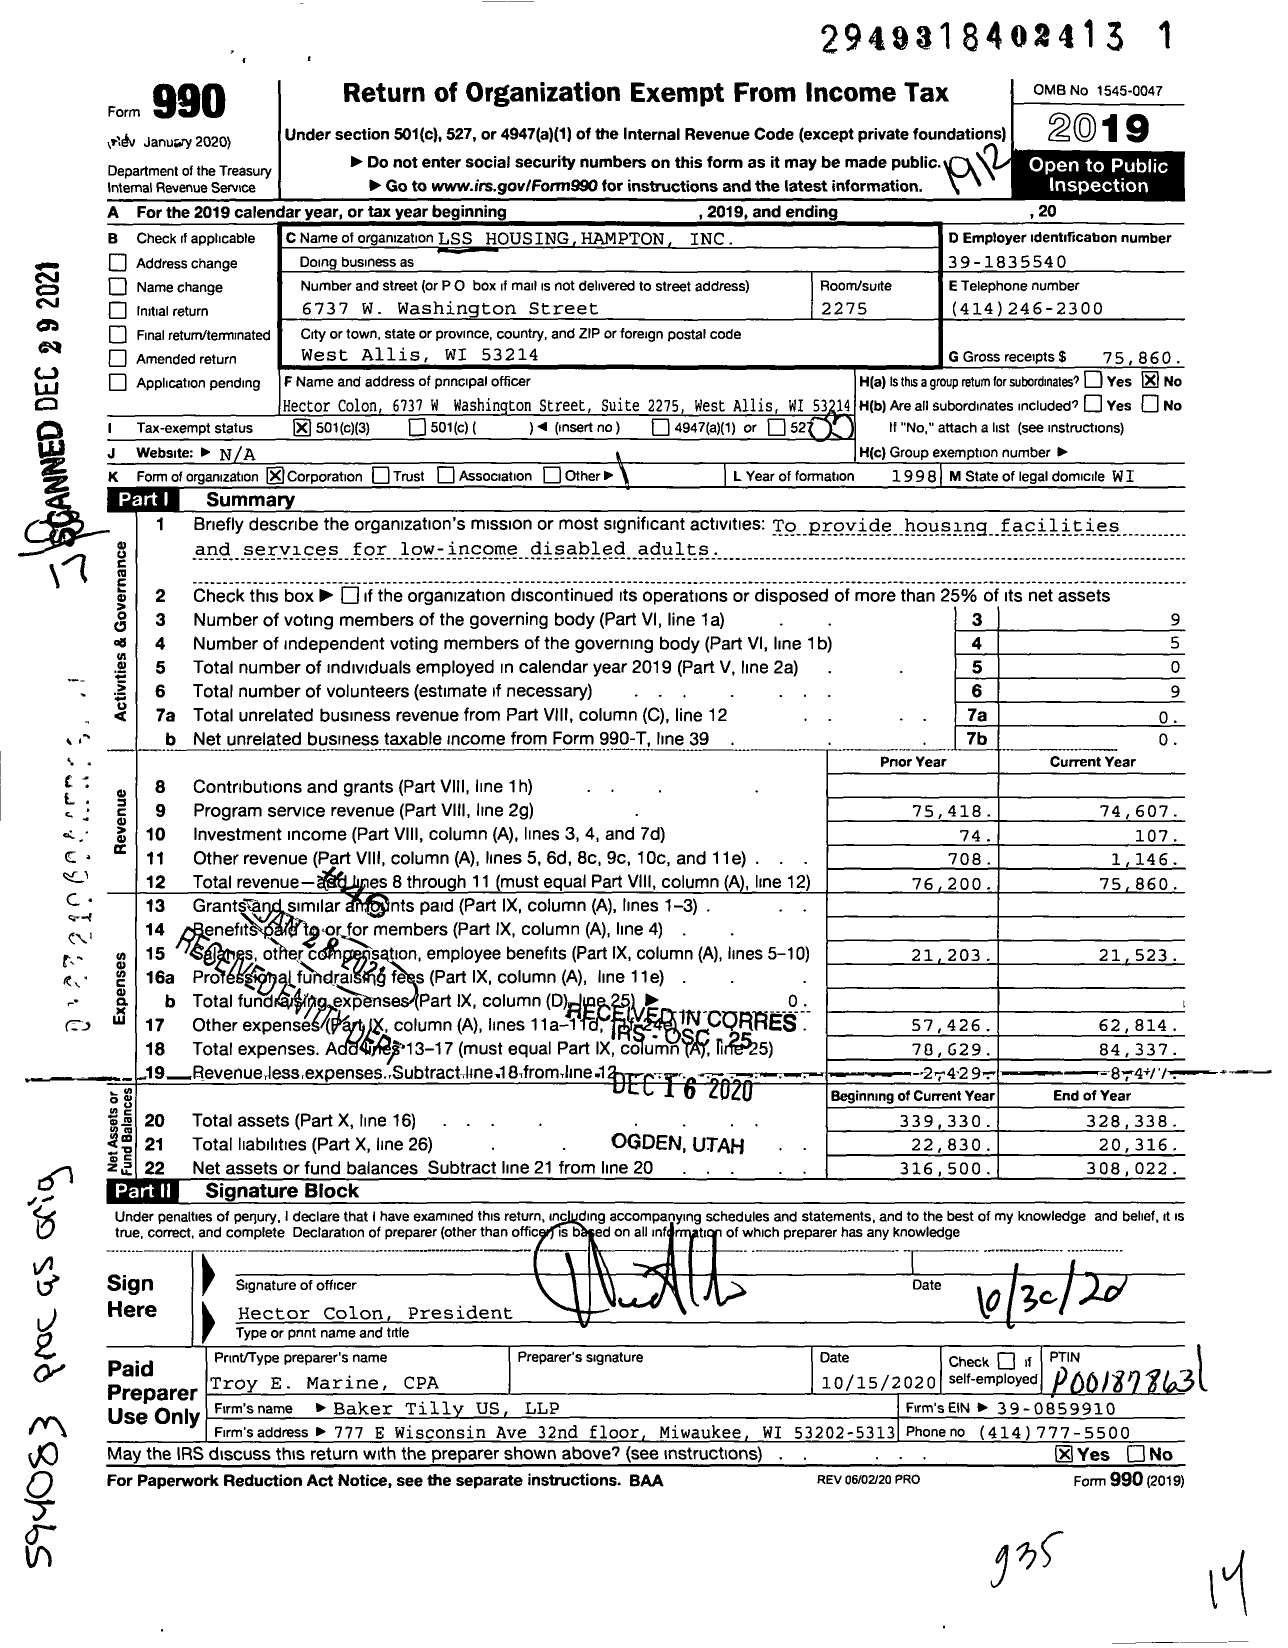 Image of first page of 2019 Form 990 for LSS Housing Hampton